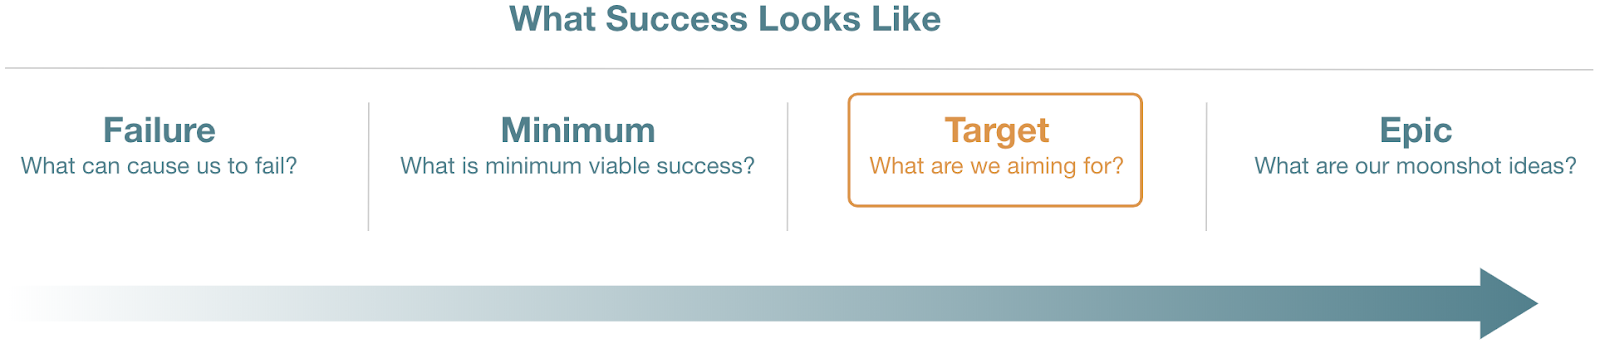 The title "What Success Looks Like" above a diagram showing a spectrum with the labels Failure, Minimum, Target, and Epic